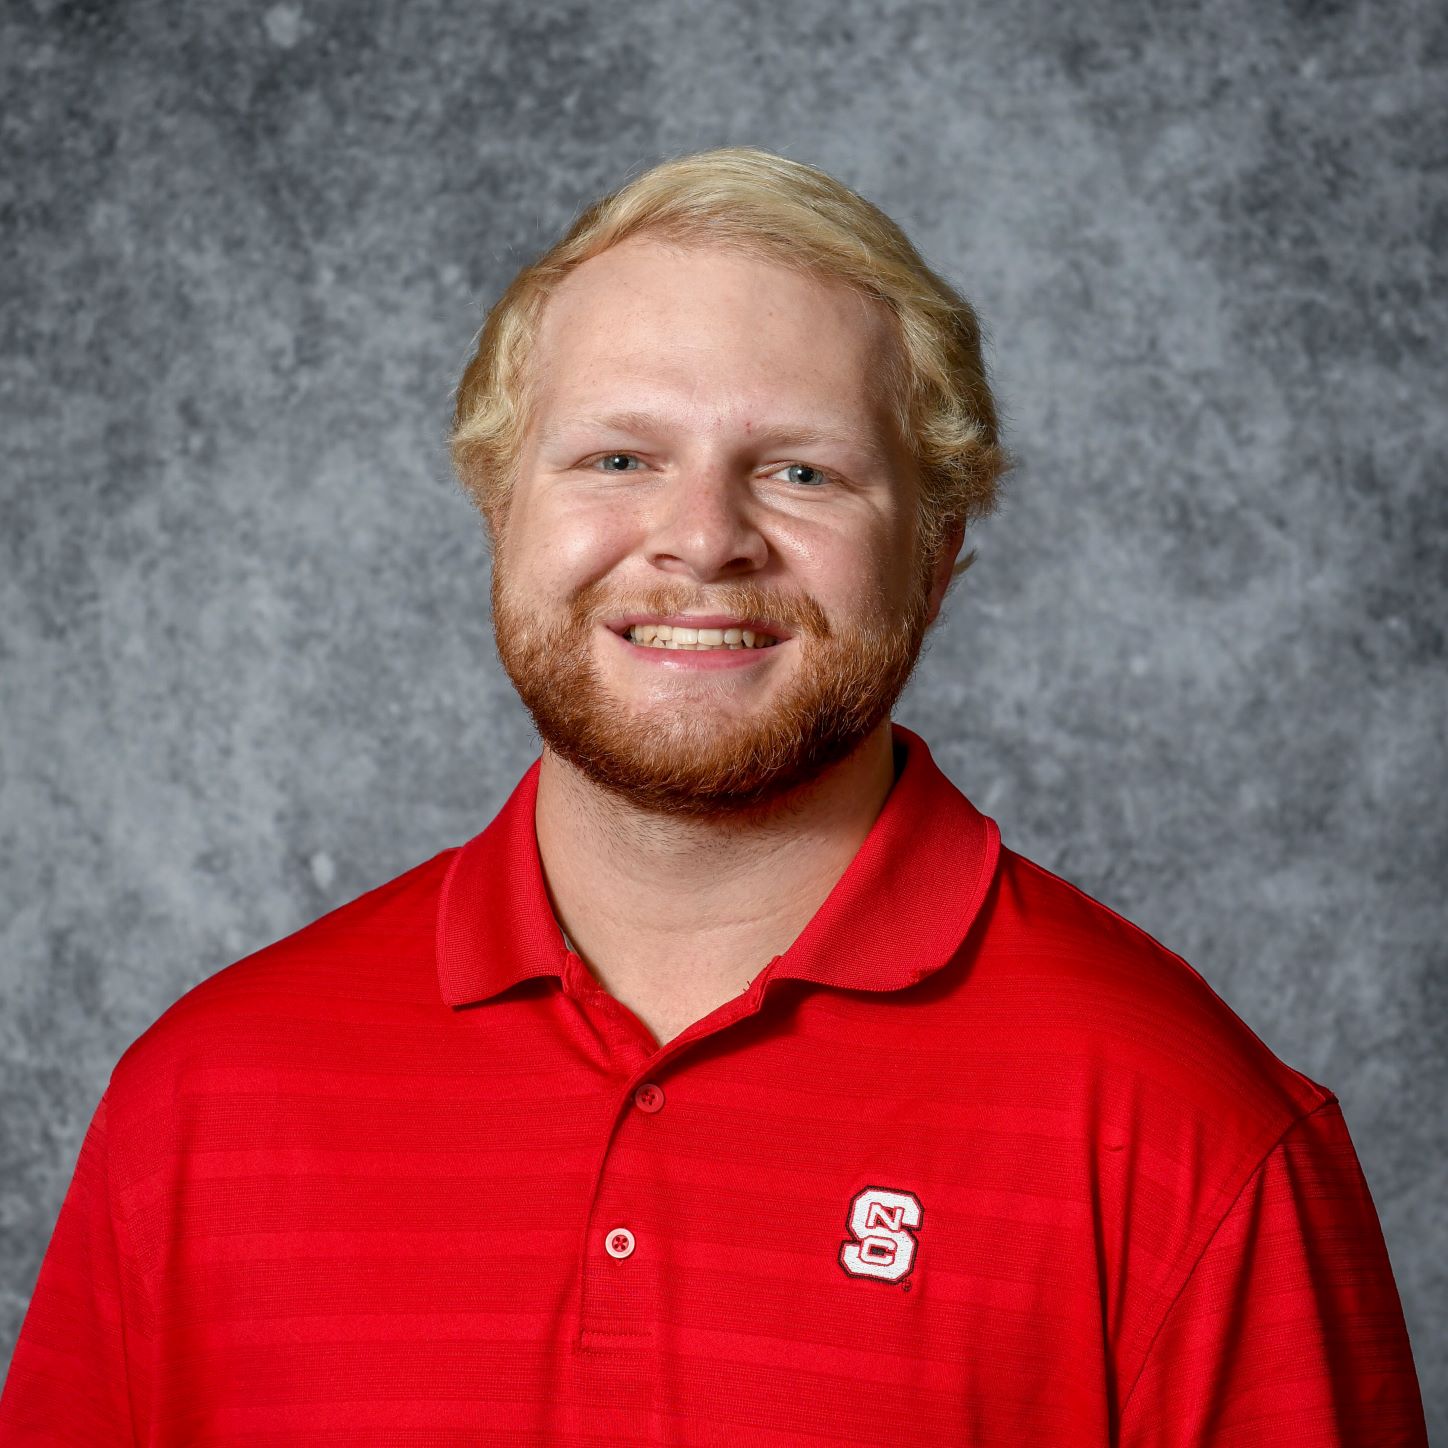 The image represents the headshot of a young smiling adult with golden hair and a short beard wearing a red T-shirt before a grey background.